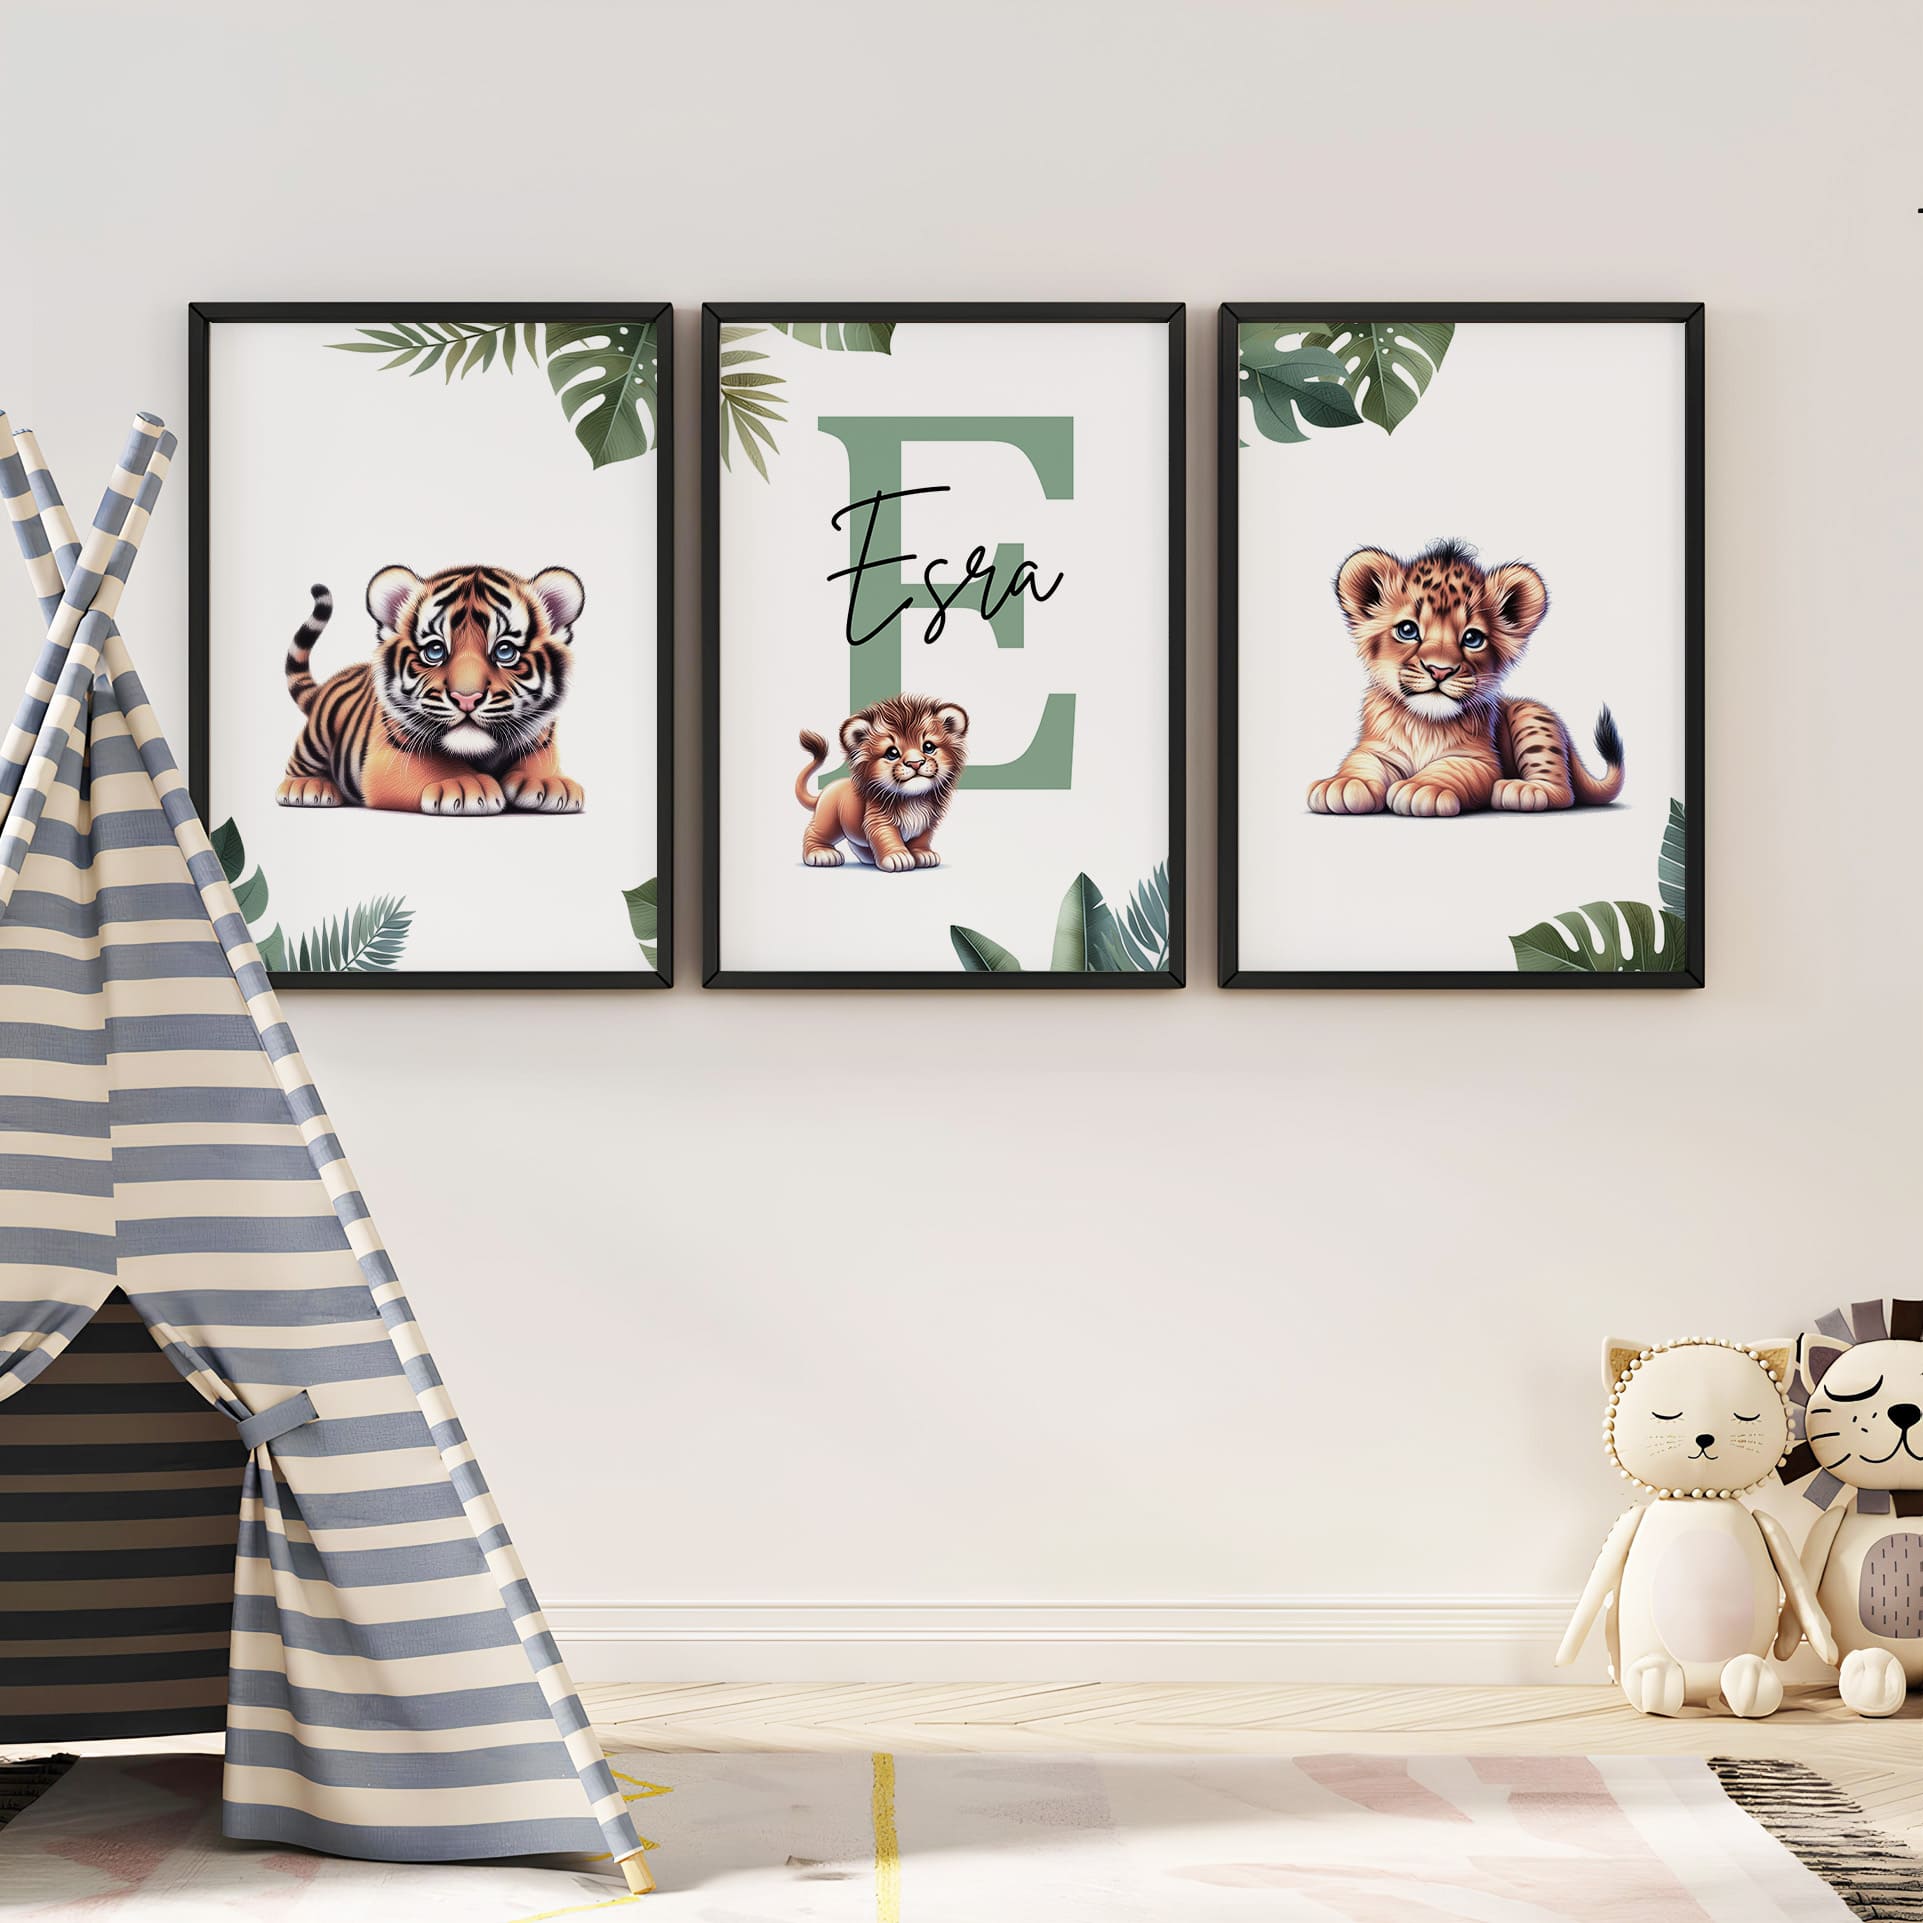 Set of three A4 prints featuring baby big cats - lion cub, tiger cub, and cheetah cub. The animals are depicted in a cartoony, bright style, resembling coloured pencil drawings. Jungle-style leaves adorn the edges of the prints. The middle print features a smaller animal compared to the others, with a large initial letter in the background. A personalised name in black overlays the initial letter.